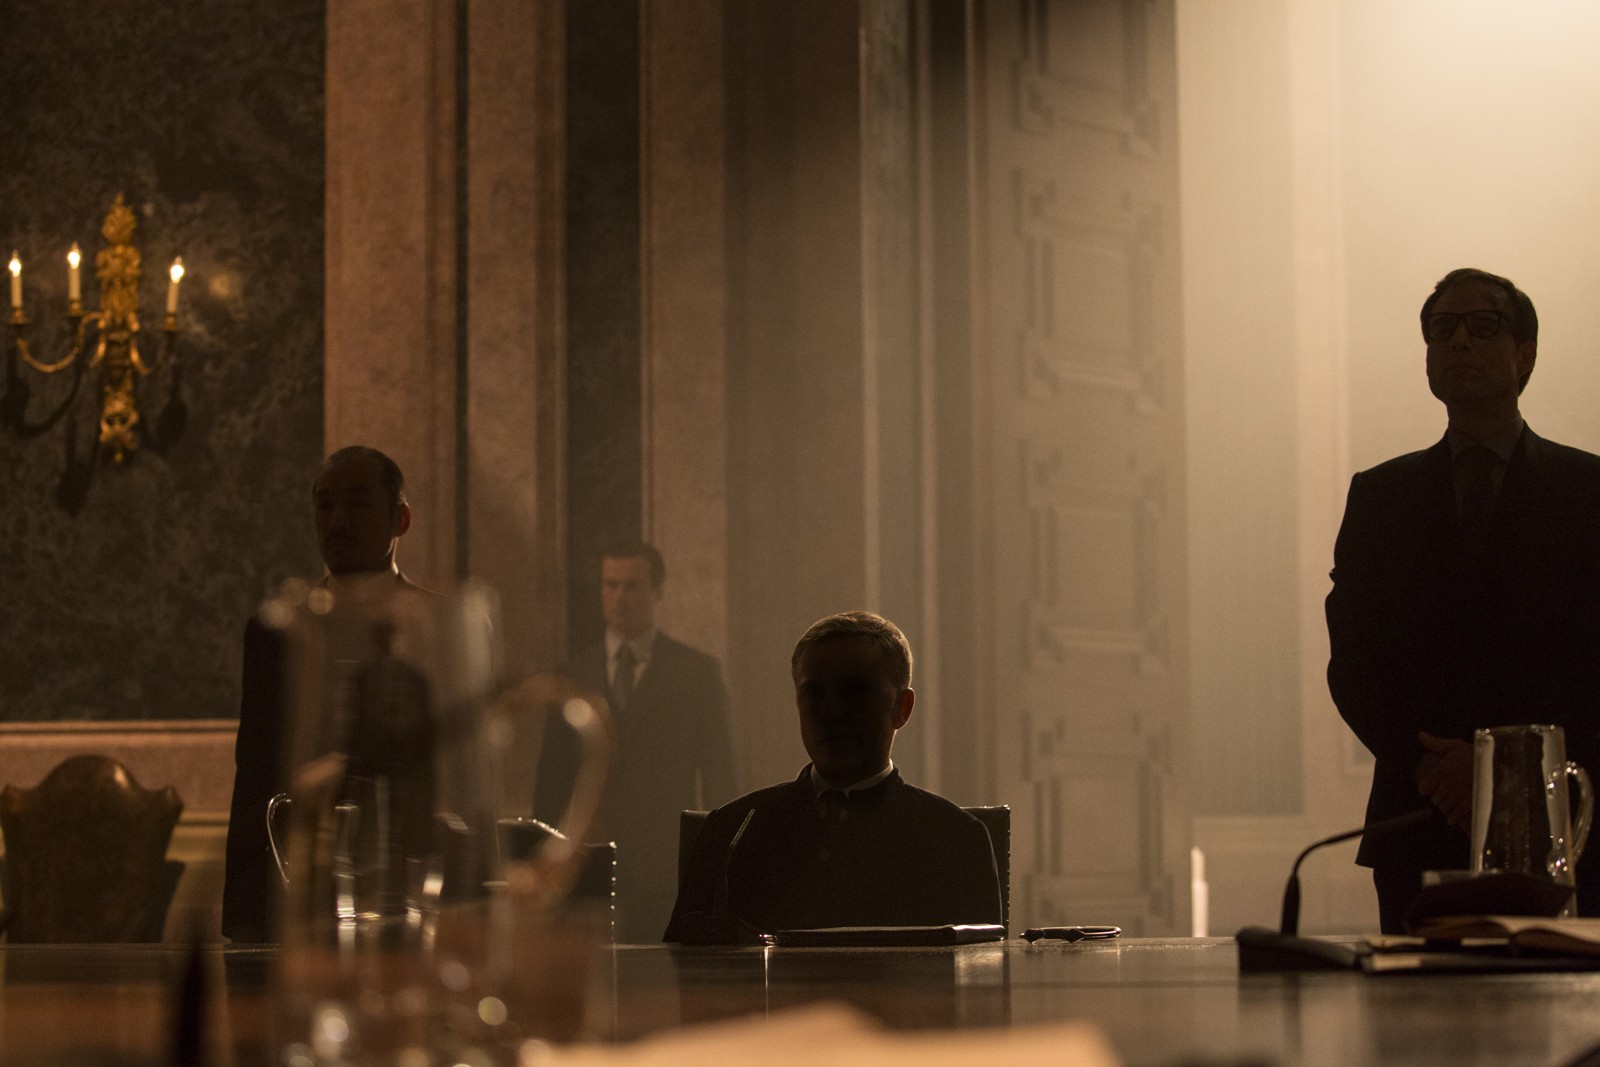 Christoph Waltz stars as Franz Oberhauser in Sony Pictures' Spectre (2015)